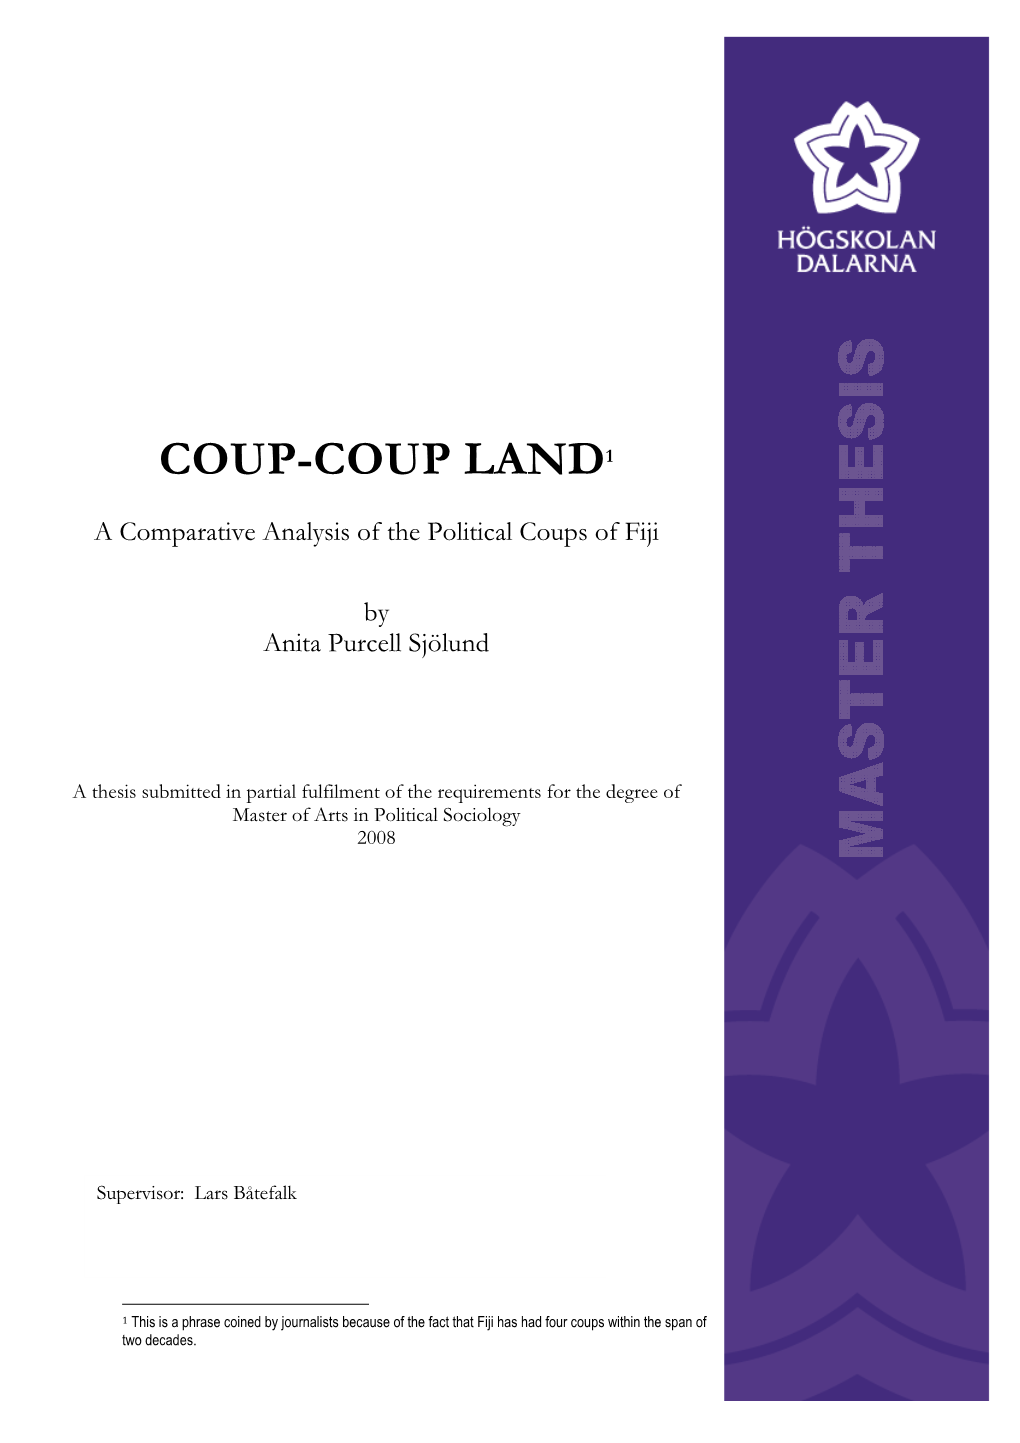 A Comparative Analysis of the Political Coups of Fiji by Anita Purcell Sjölund